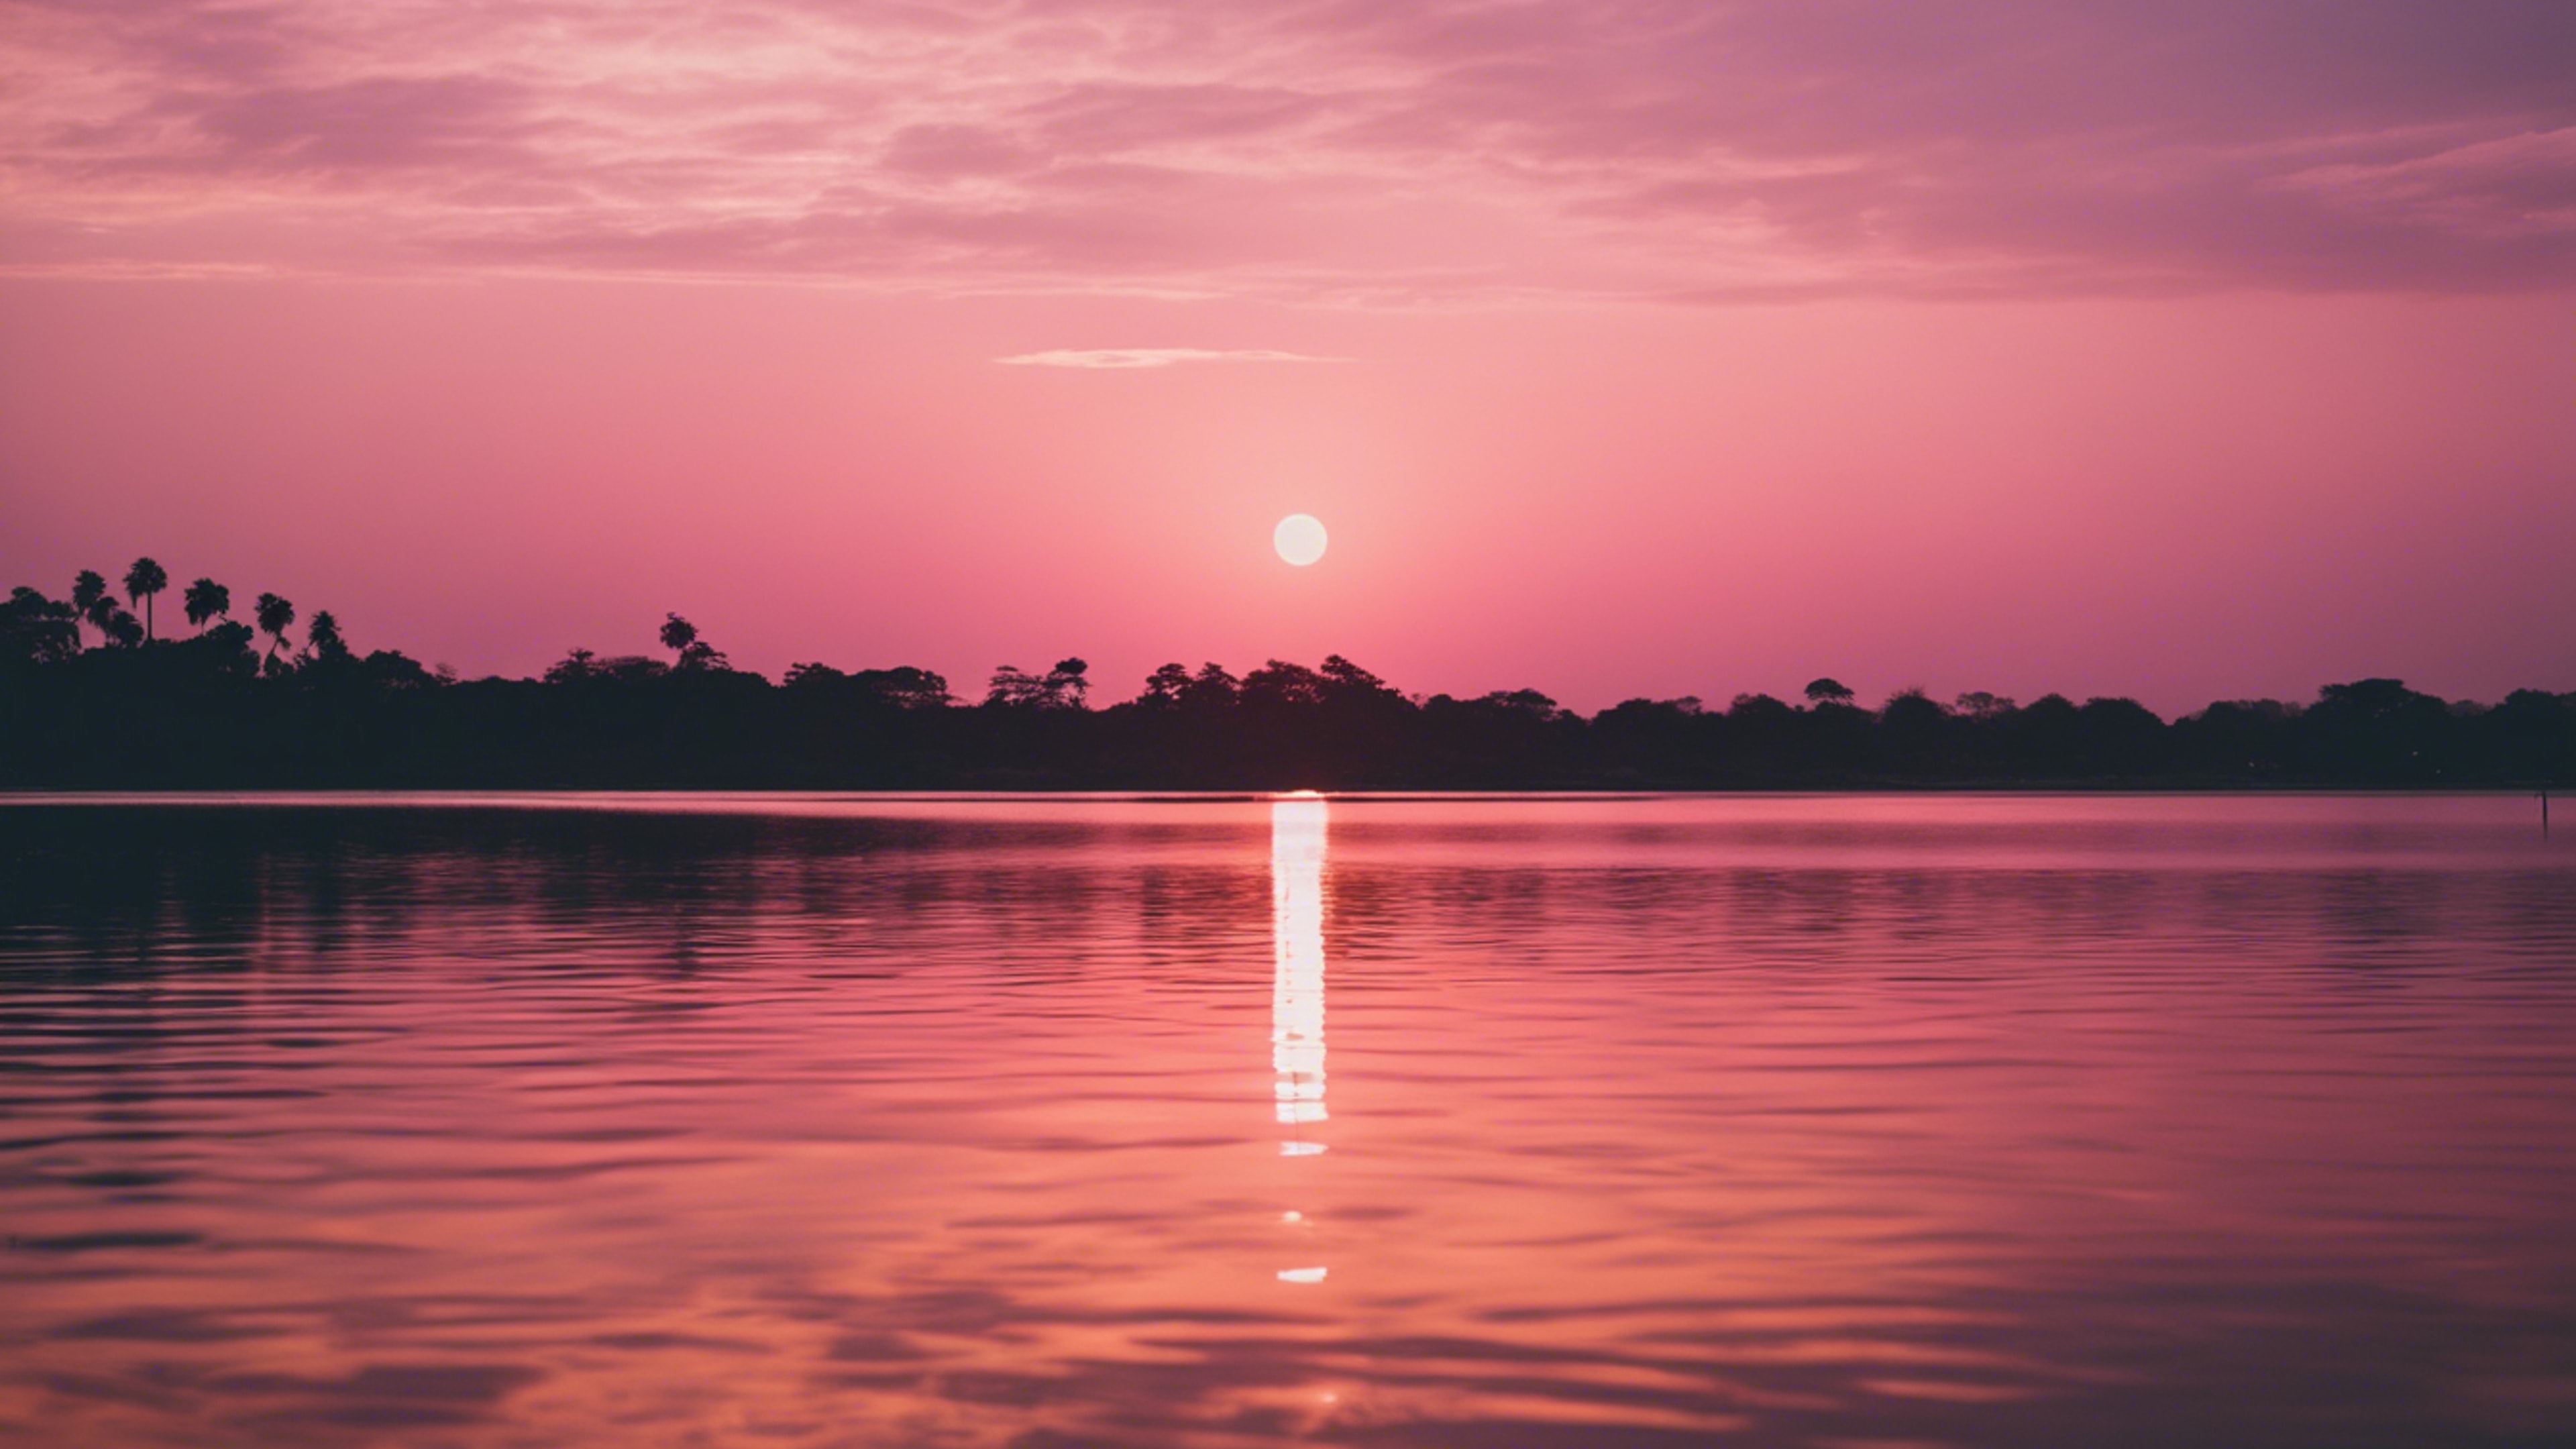 A picturesque pink and gold sunset reflecting on tranquil lagoon waters. ផ្ទាំង​រូបភាព[938883e46b5847a4931b]